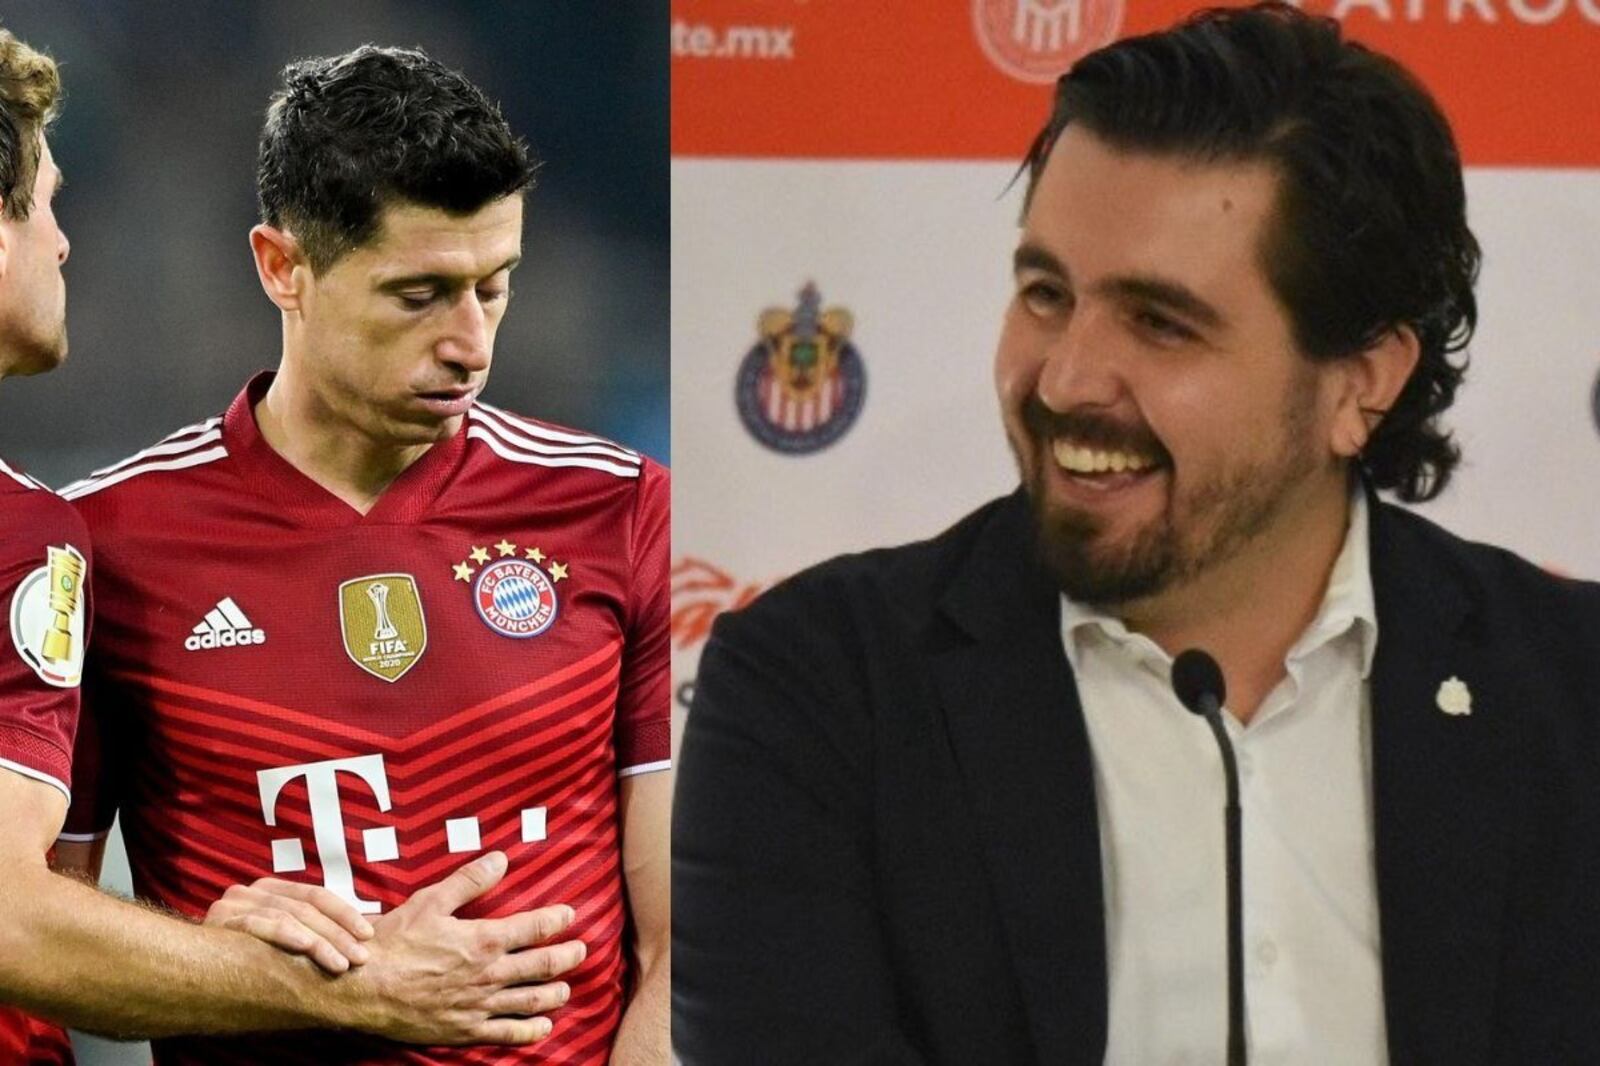 He humiliated Lewandowski and Müller in Germany, now he can reach Chivas